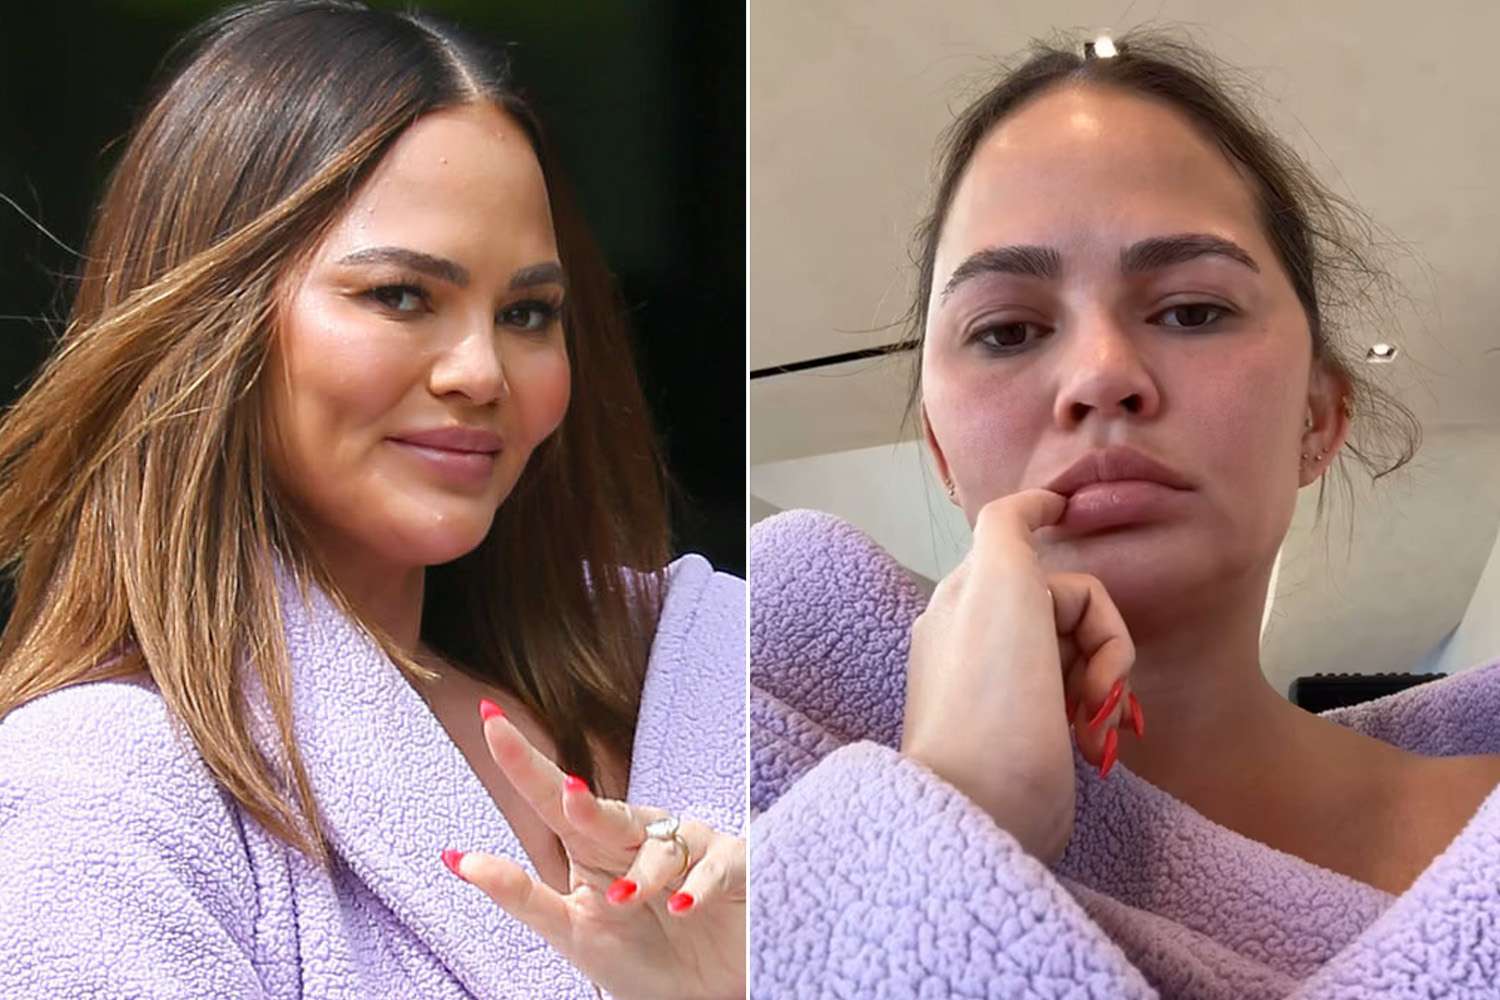 Chrissy Teigen Shares Honest Health Video: ’The Face of a Double Ear Infection’